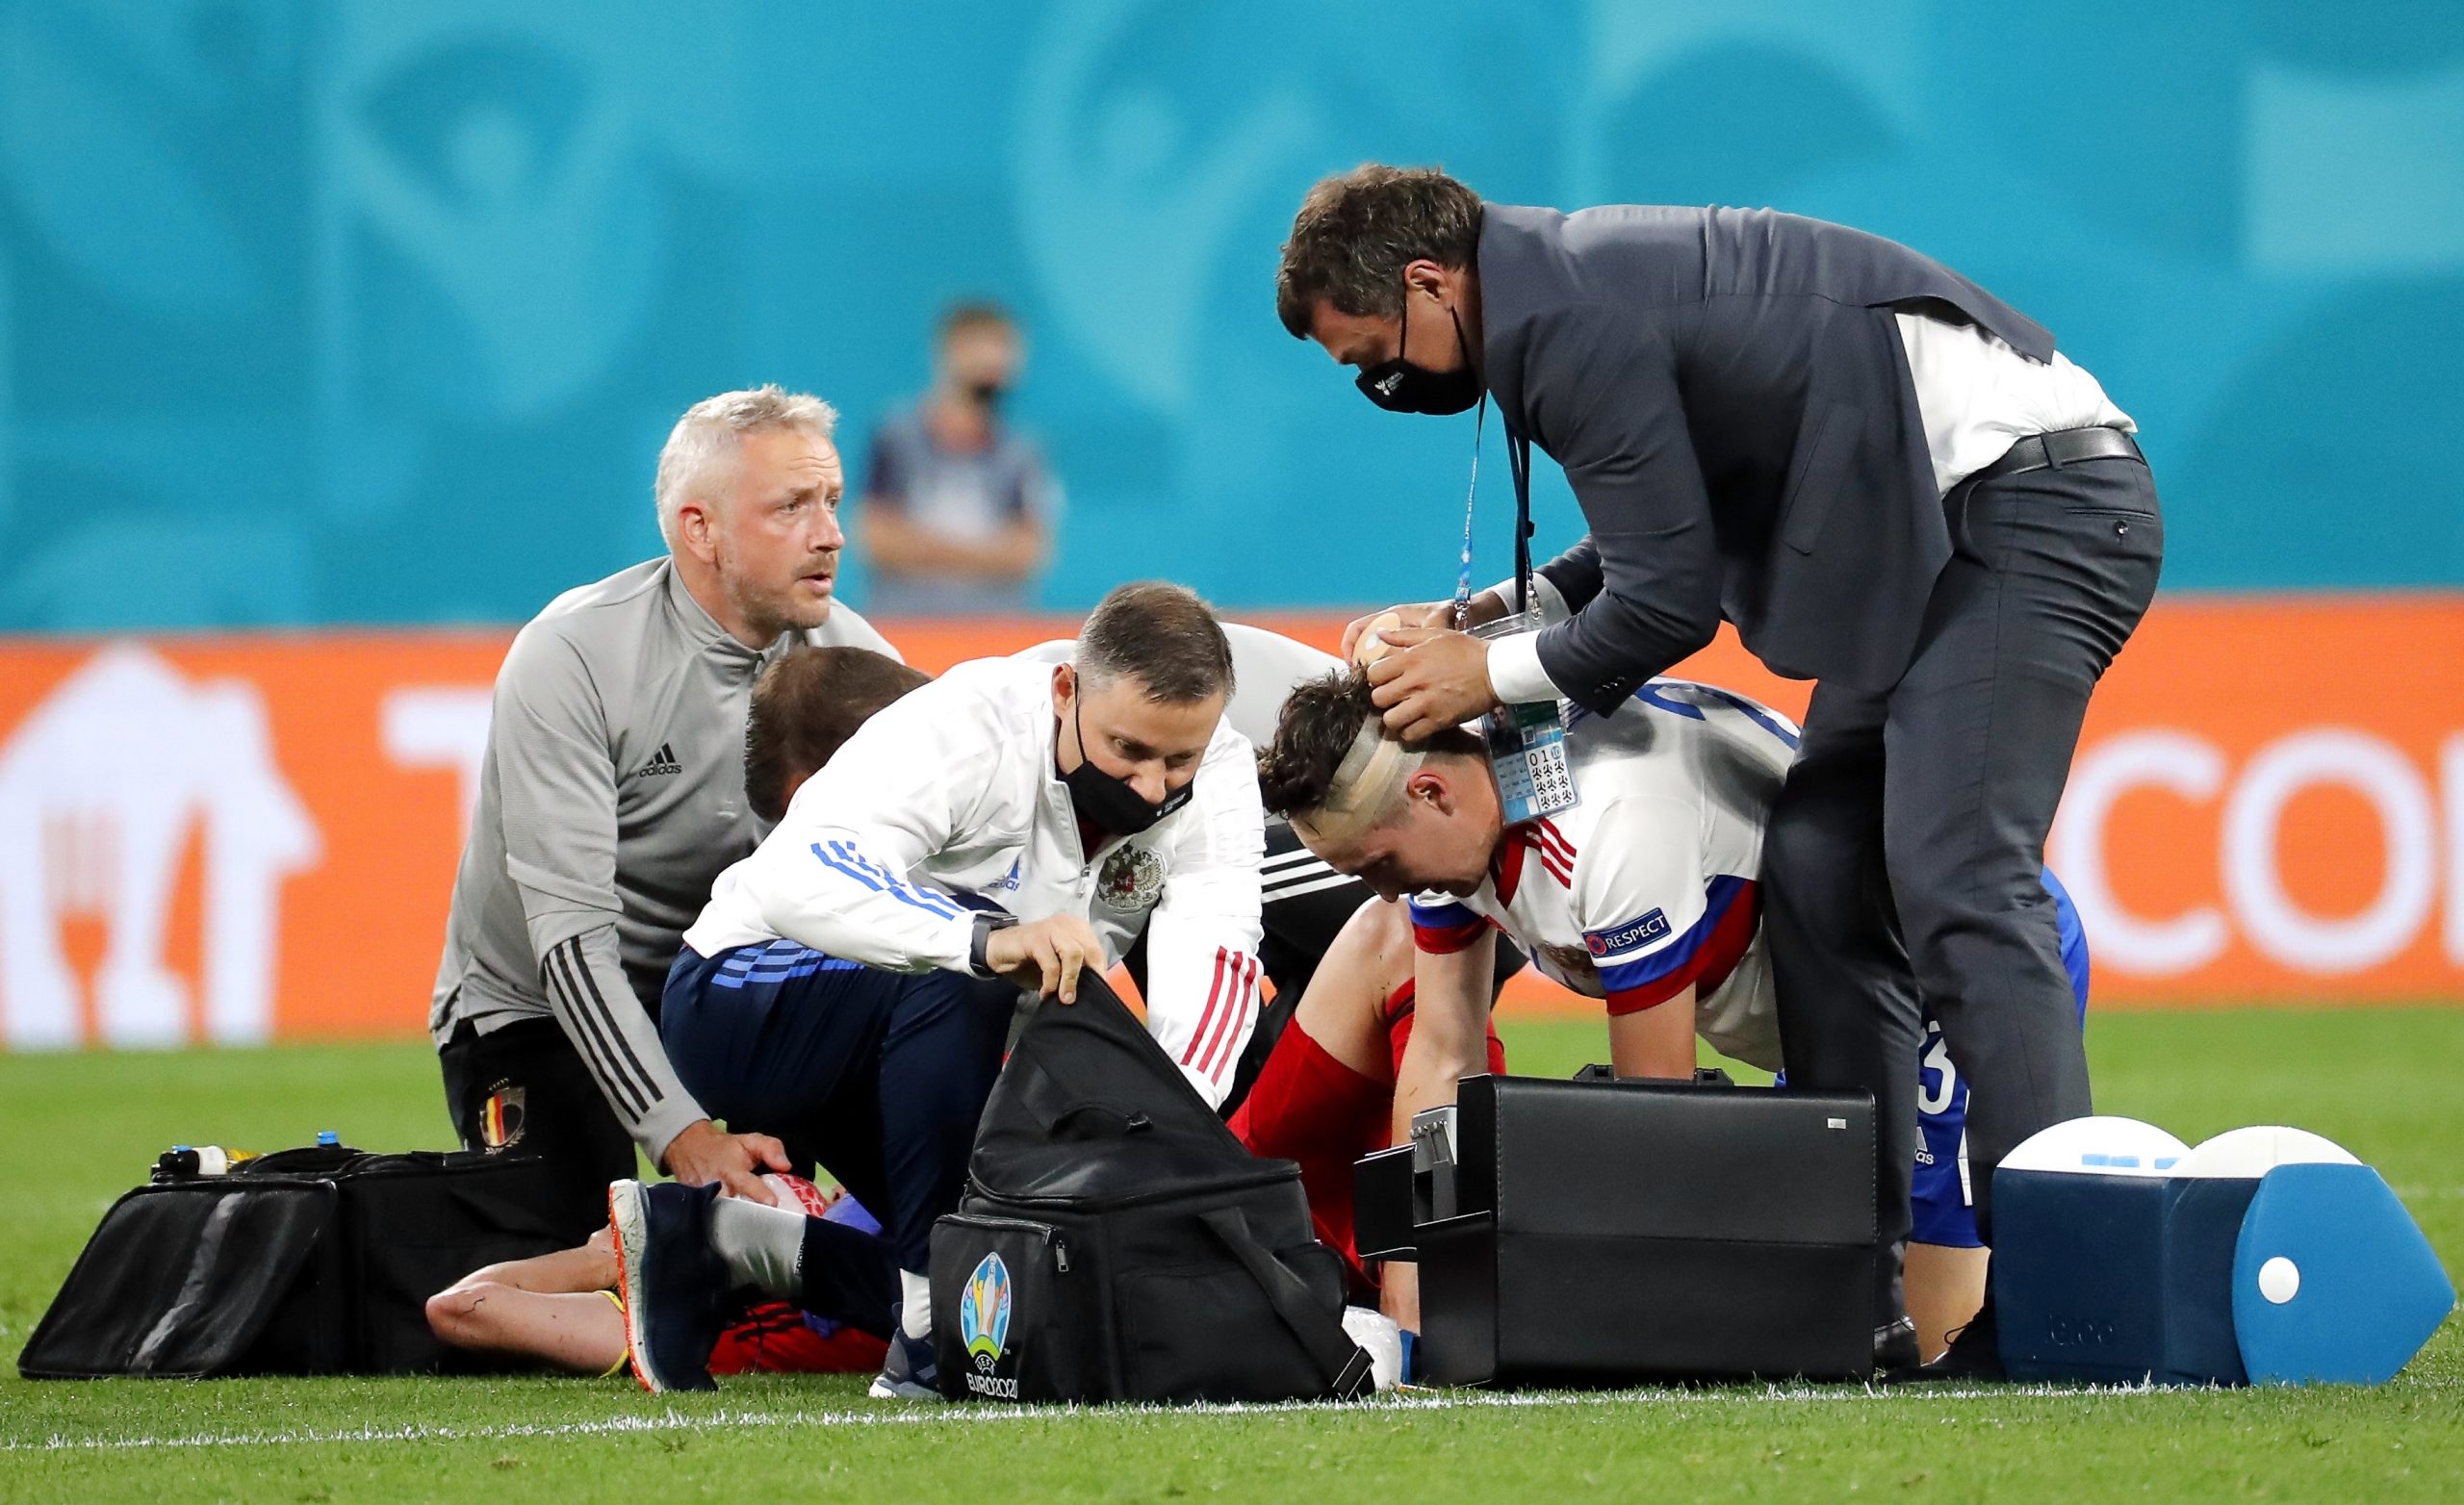 epa09265964 Timothy Castagne (bottom L) of Belgium and Daler Kuzyayev (bottom R) of Russia receive medical assistance during the UEFA EURO 2020 group B preliminary round soccer match between  Belgium and Russia in St.Petersburg, Russia, 12 June 2021.  EPA/Anatoly Maltsev / POOL (RESTRICTIONS: For editorial news reporting purposes only. Images must appear as still images and must not emulate match action video footage. Photographs published in online publications shall have an interval of at least 20 seconds between the posting.)